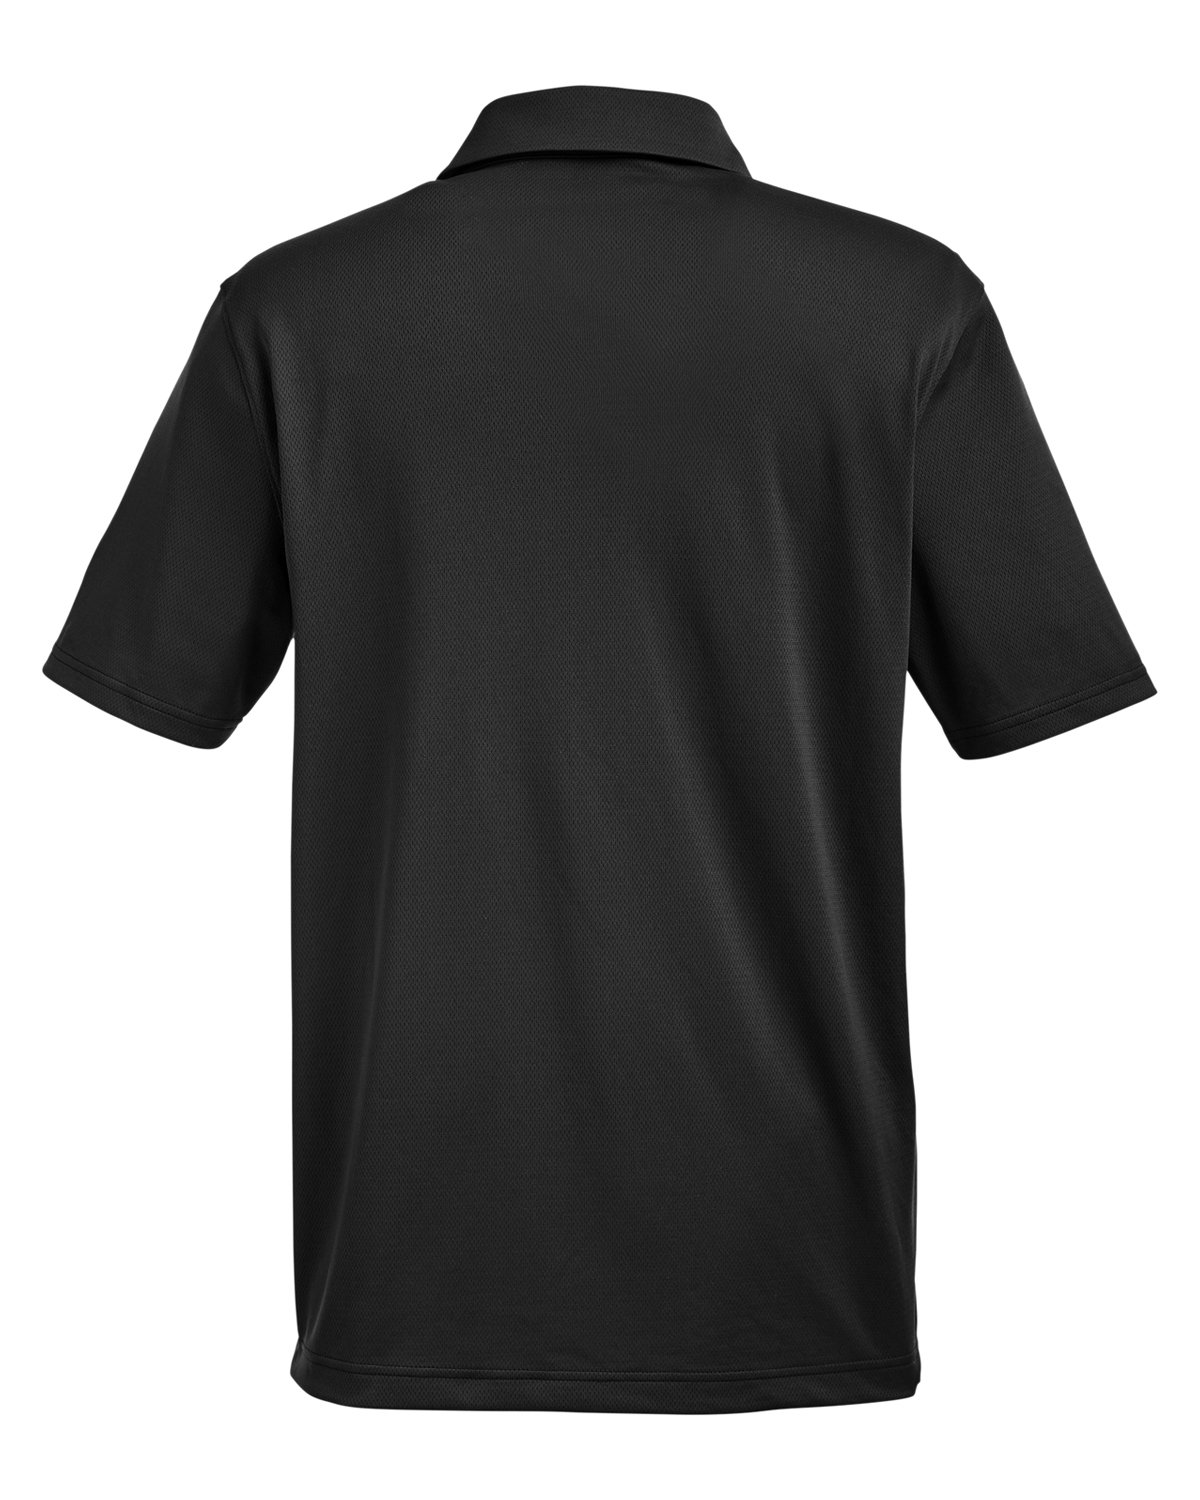 Under Armour Men's Tech™ Polo | Generic Site - Priced